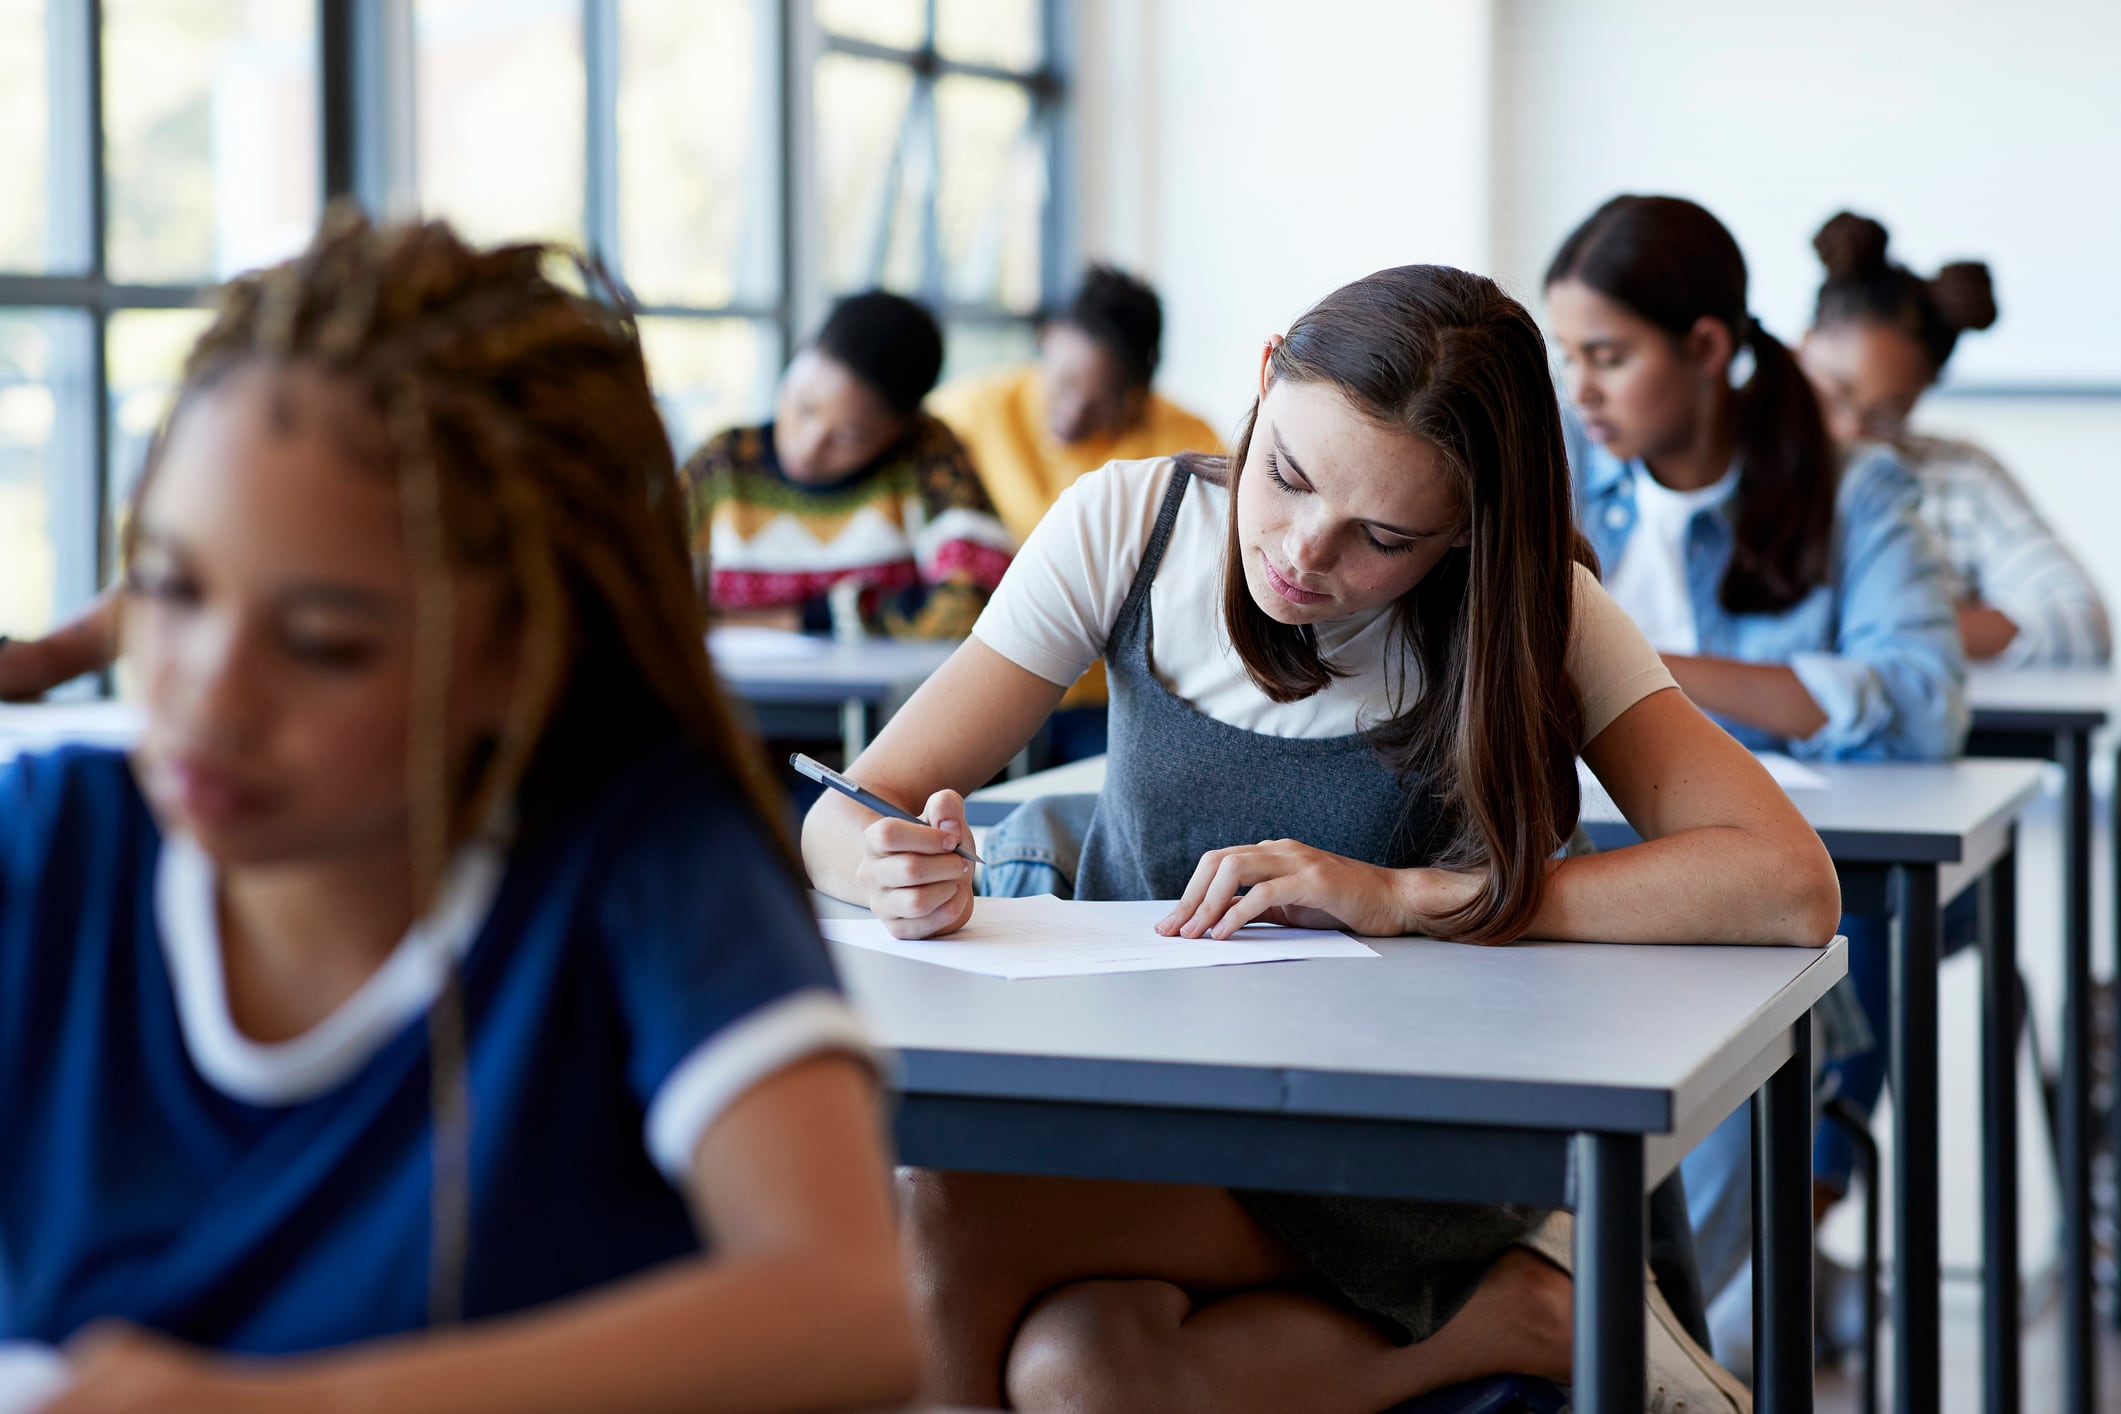 Students sit at white desks taking exams with paper and pencil